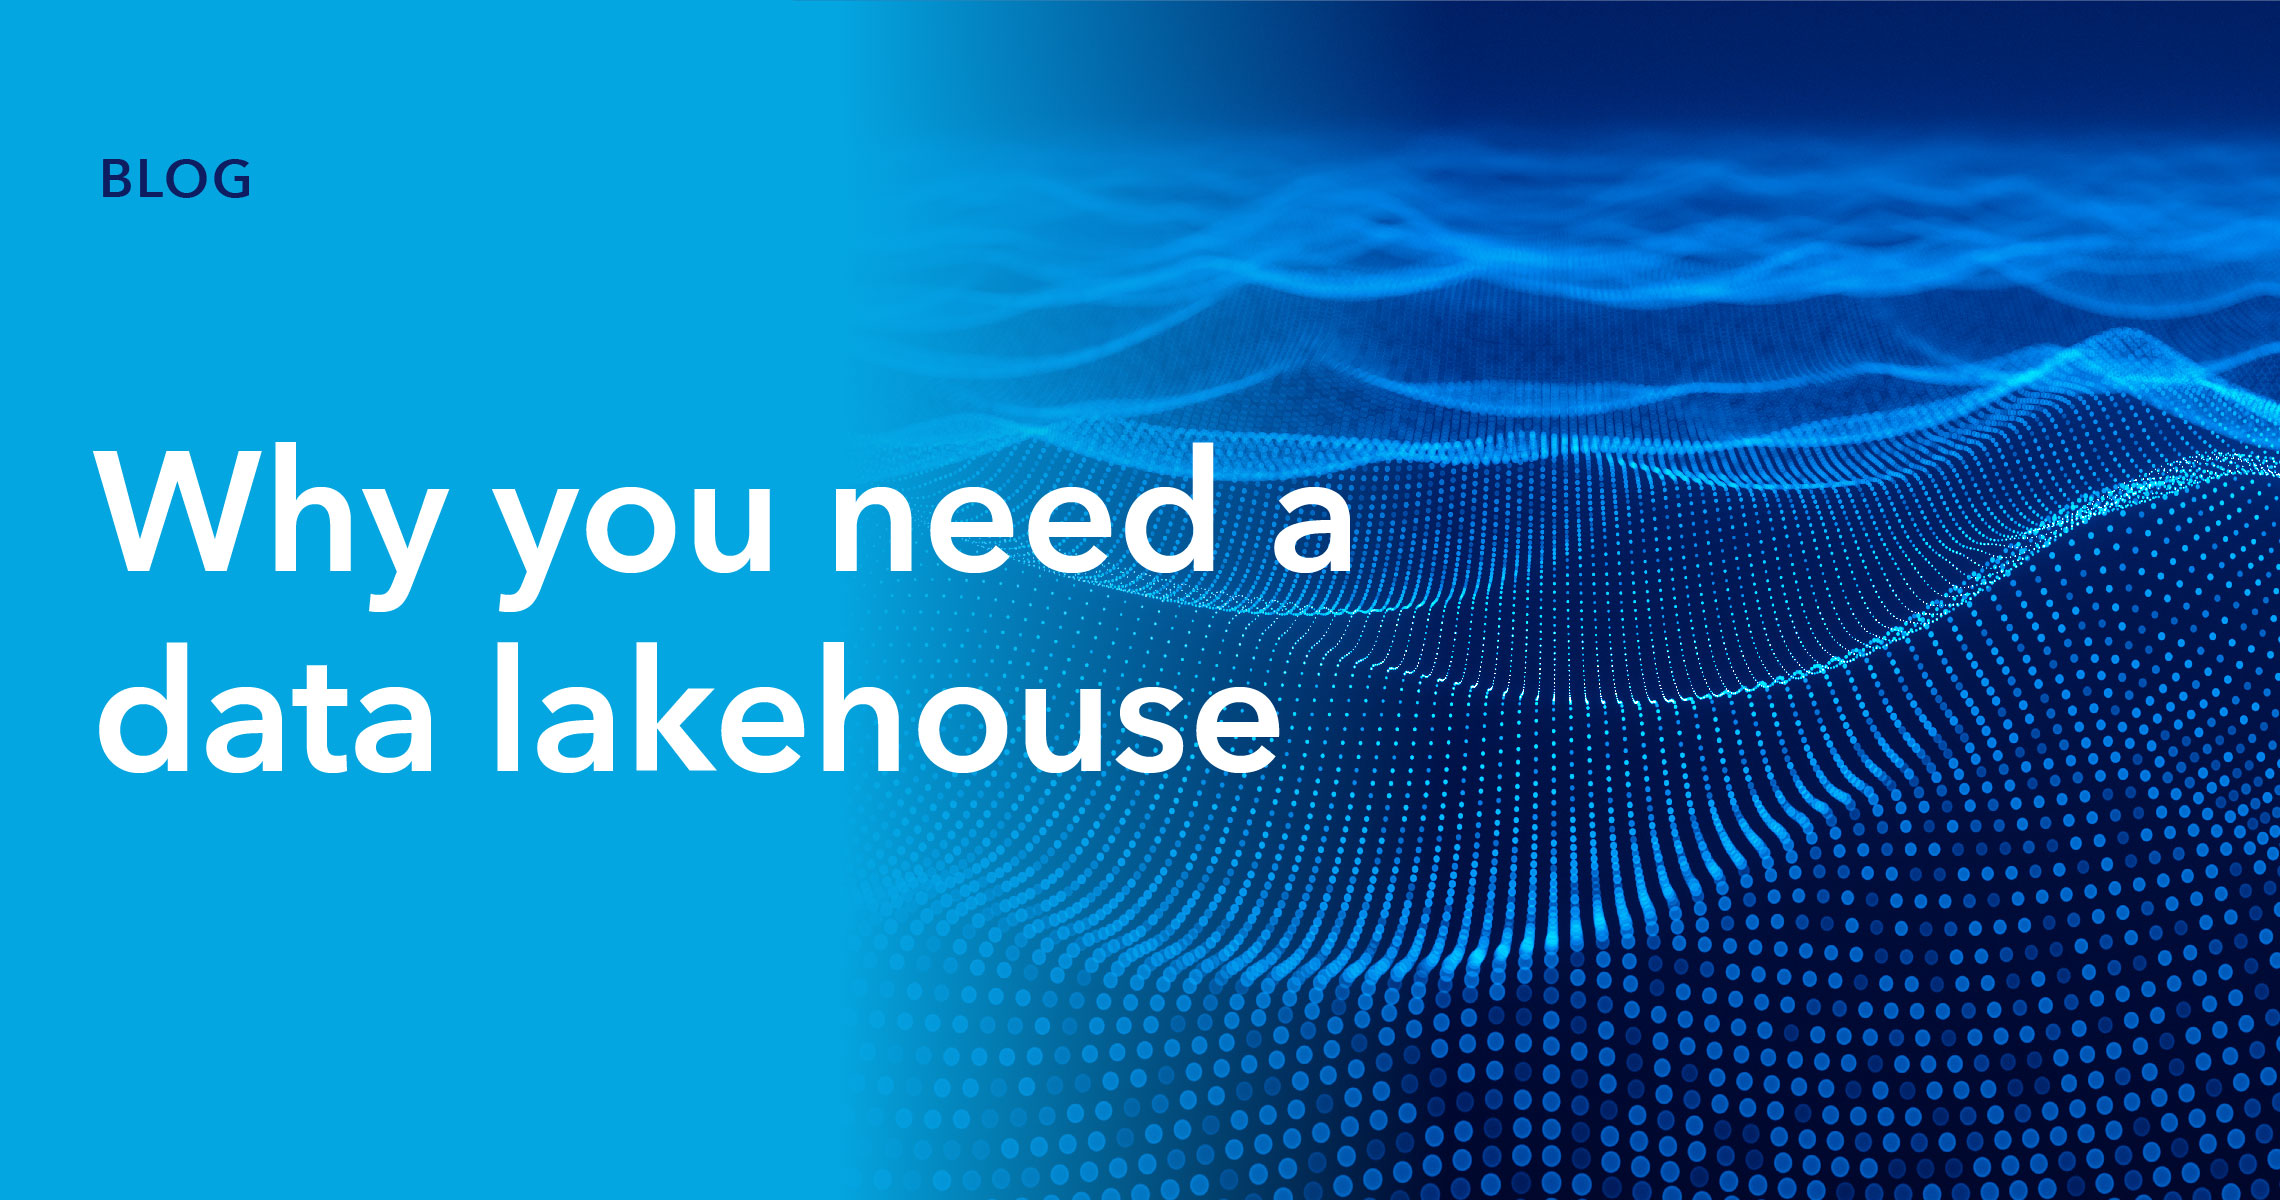 Why you need a data lakehouse